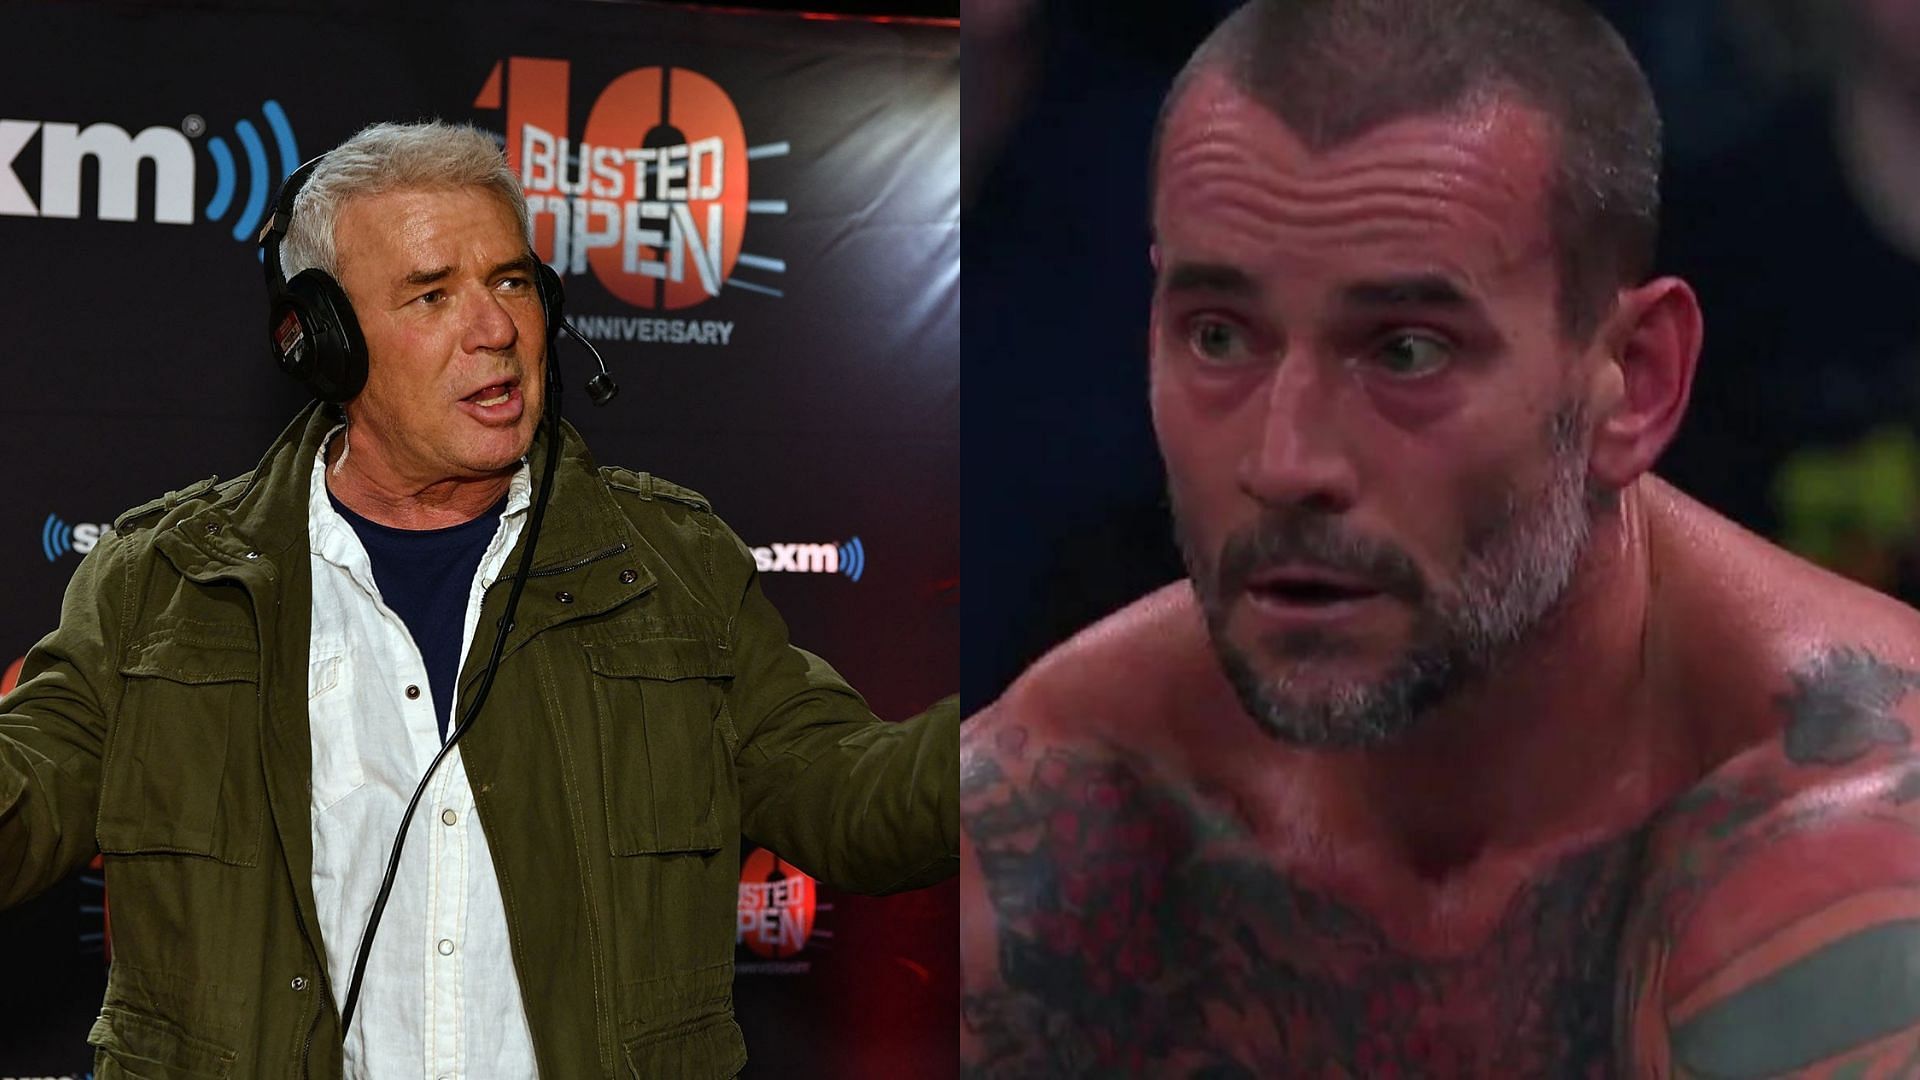 Eric Bischoff (left) and CM Punk (right) used to both work for WWE